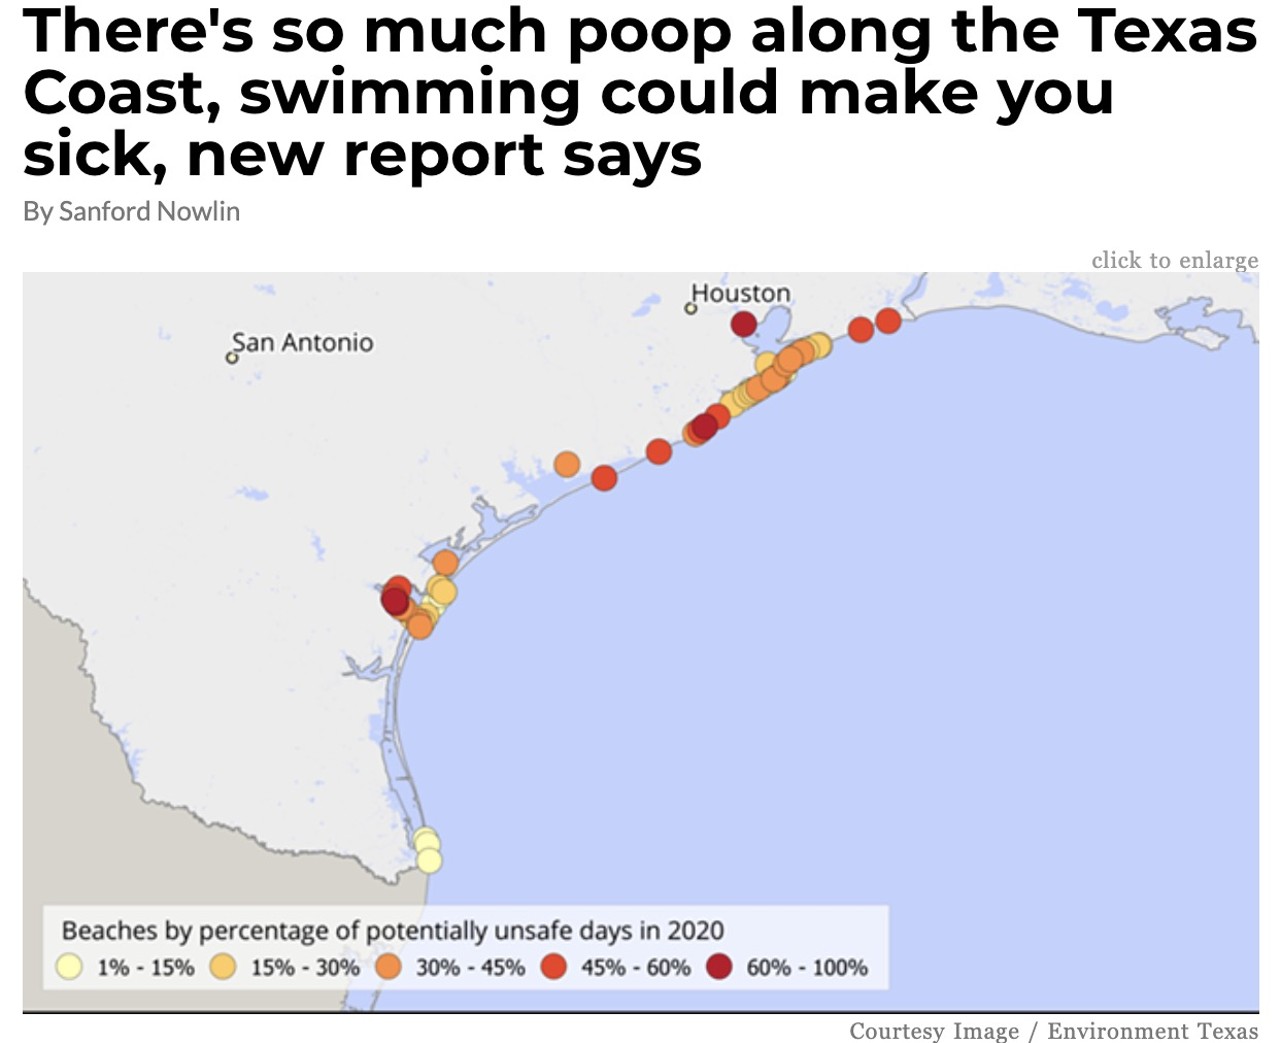 4. There's so much poop along the Texas Coast, swimming could make you sick, new report says